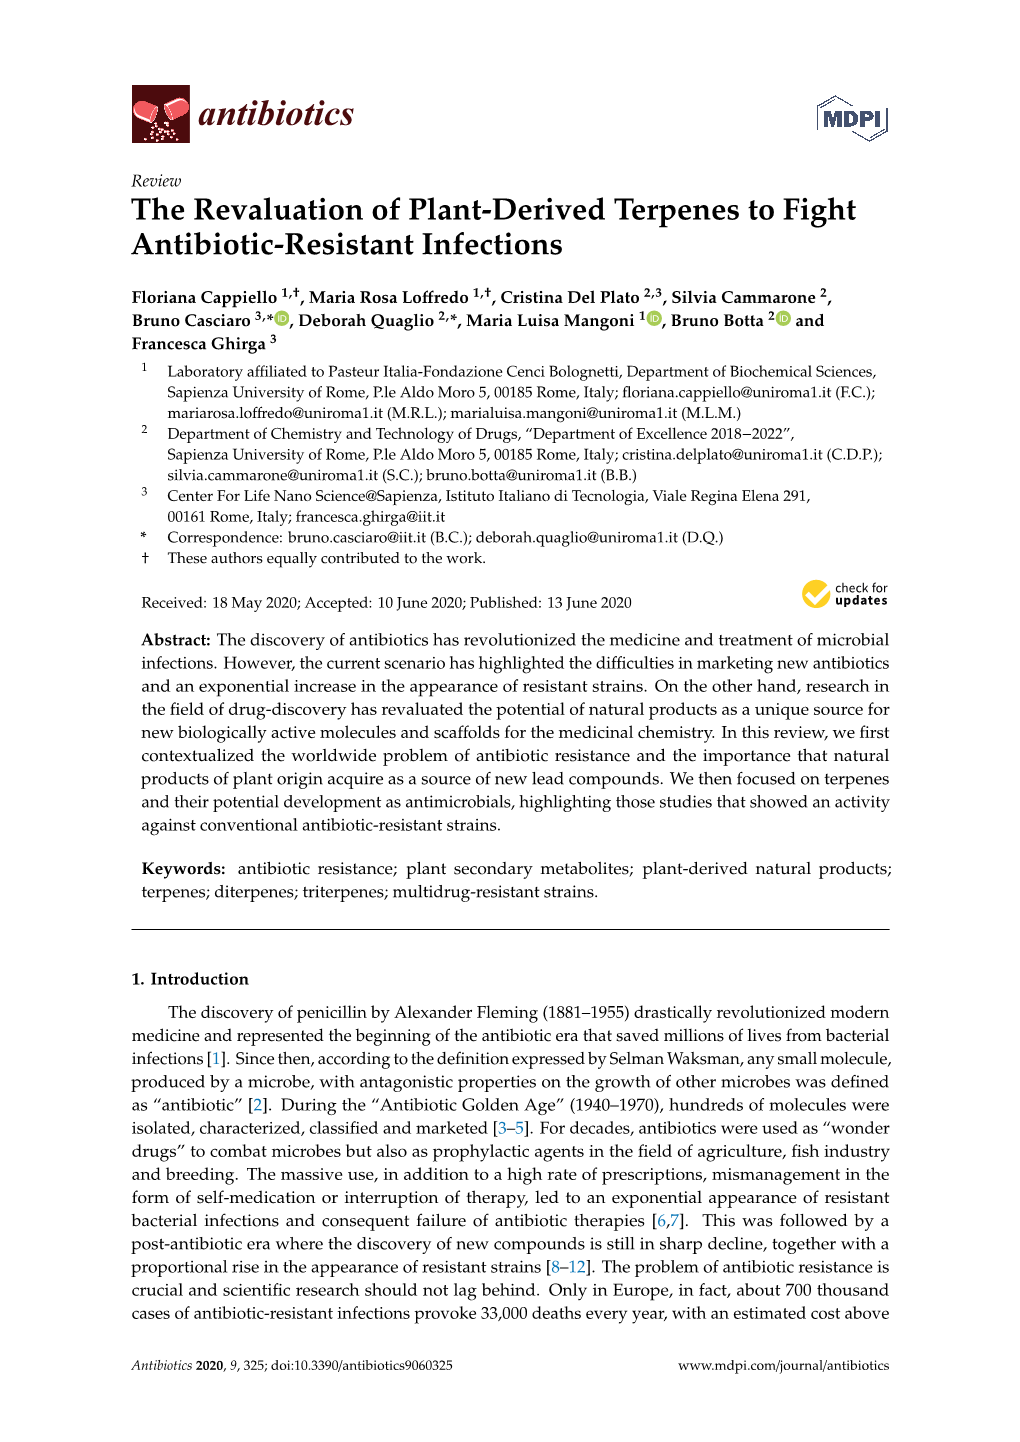 The Revaluation of Plant-Derived Terpenes to Fight Antibiotic-Resistant Infections